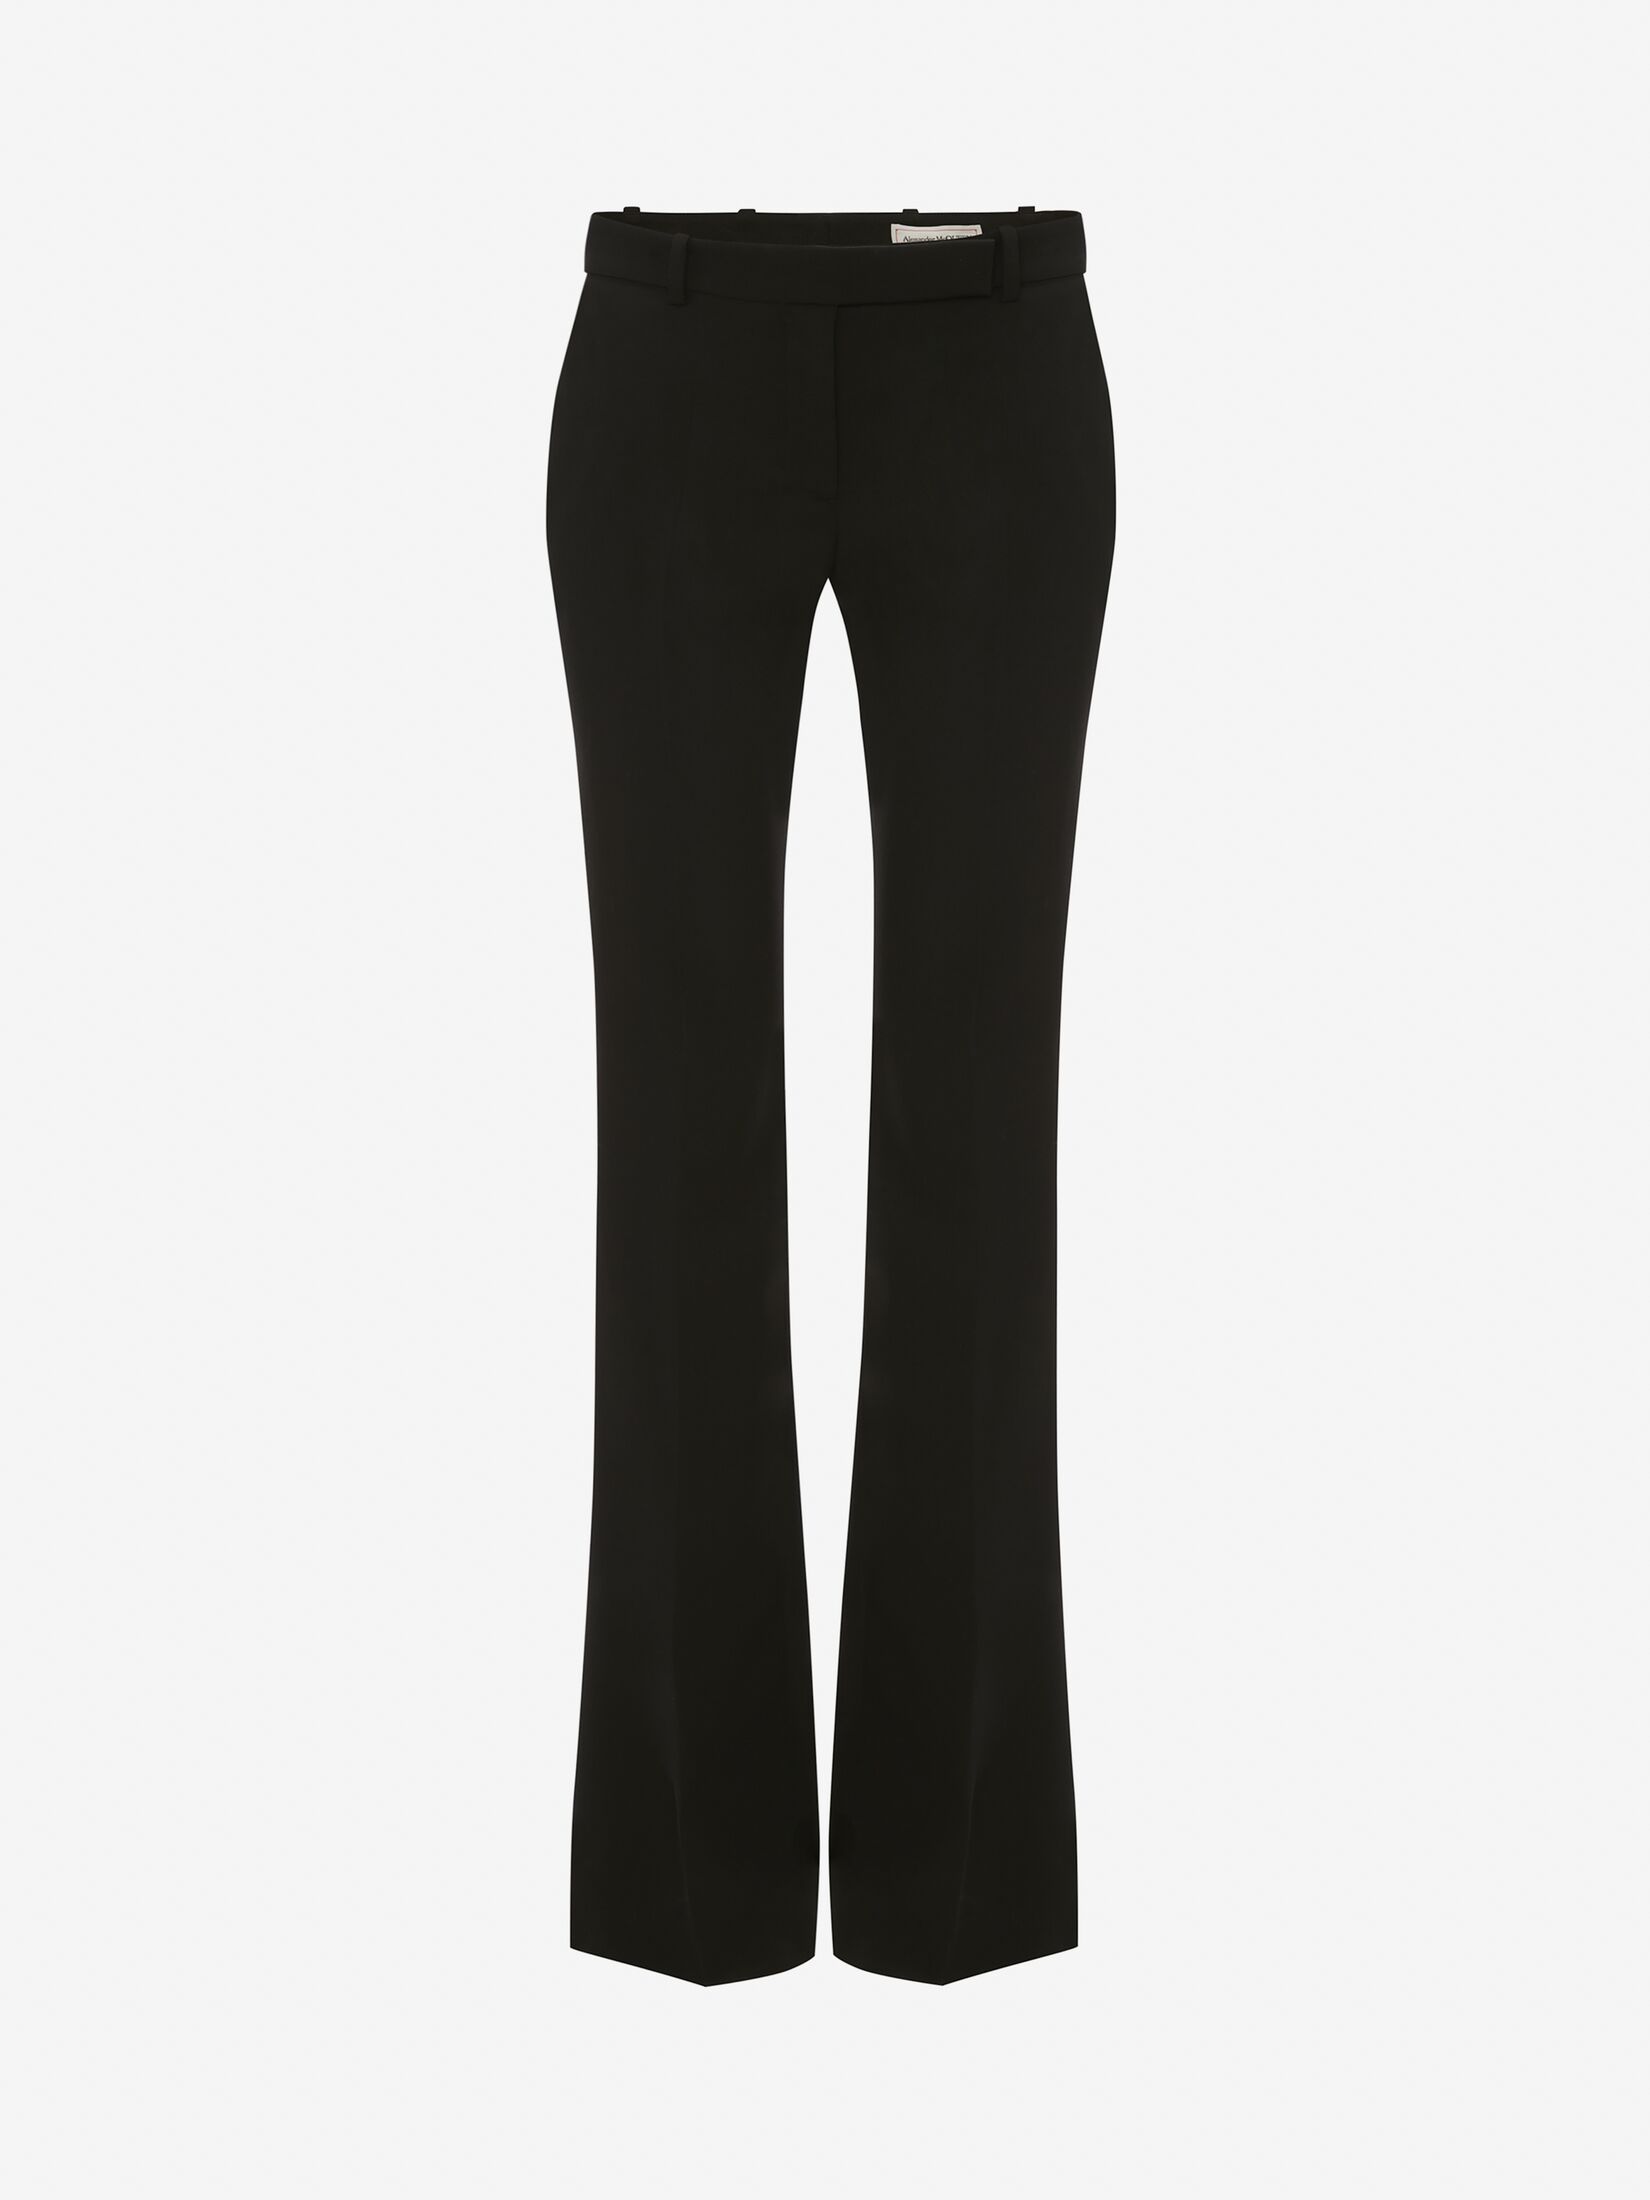 Bootcut tailored trousers in Black